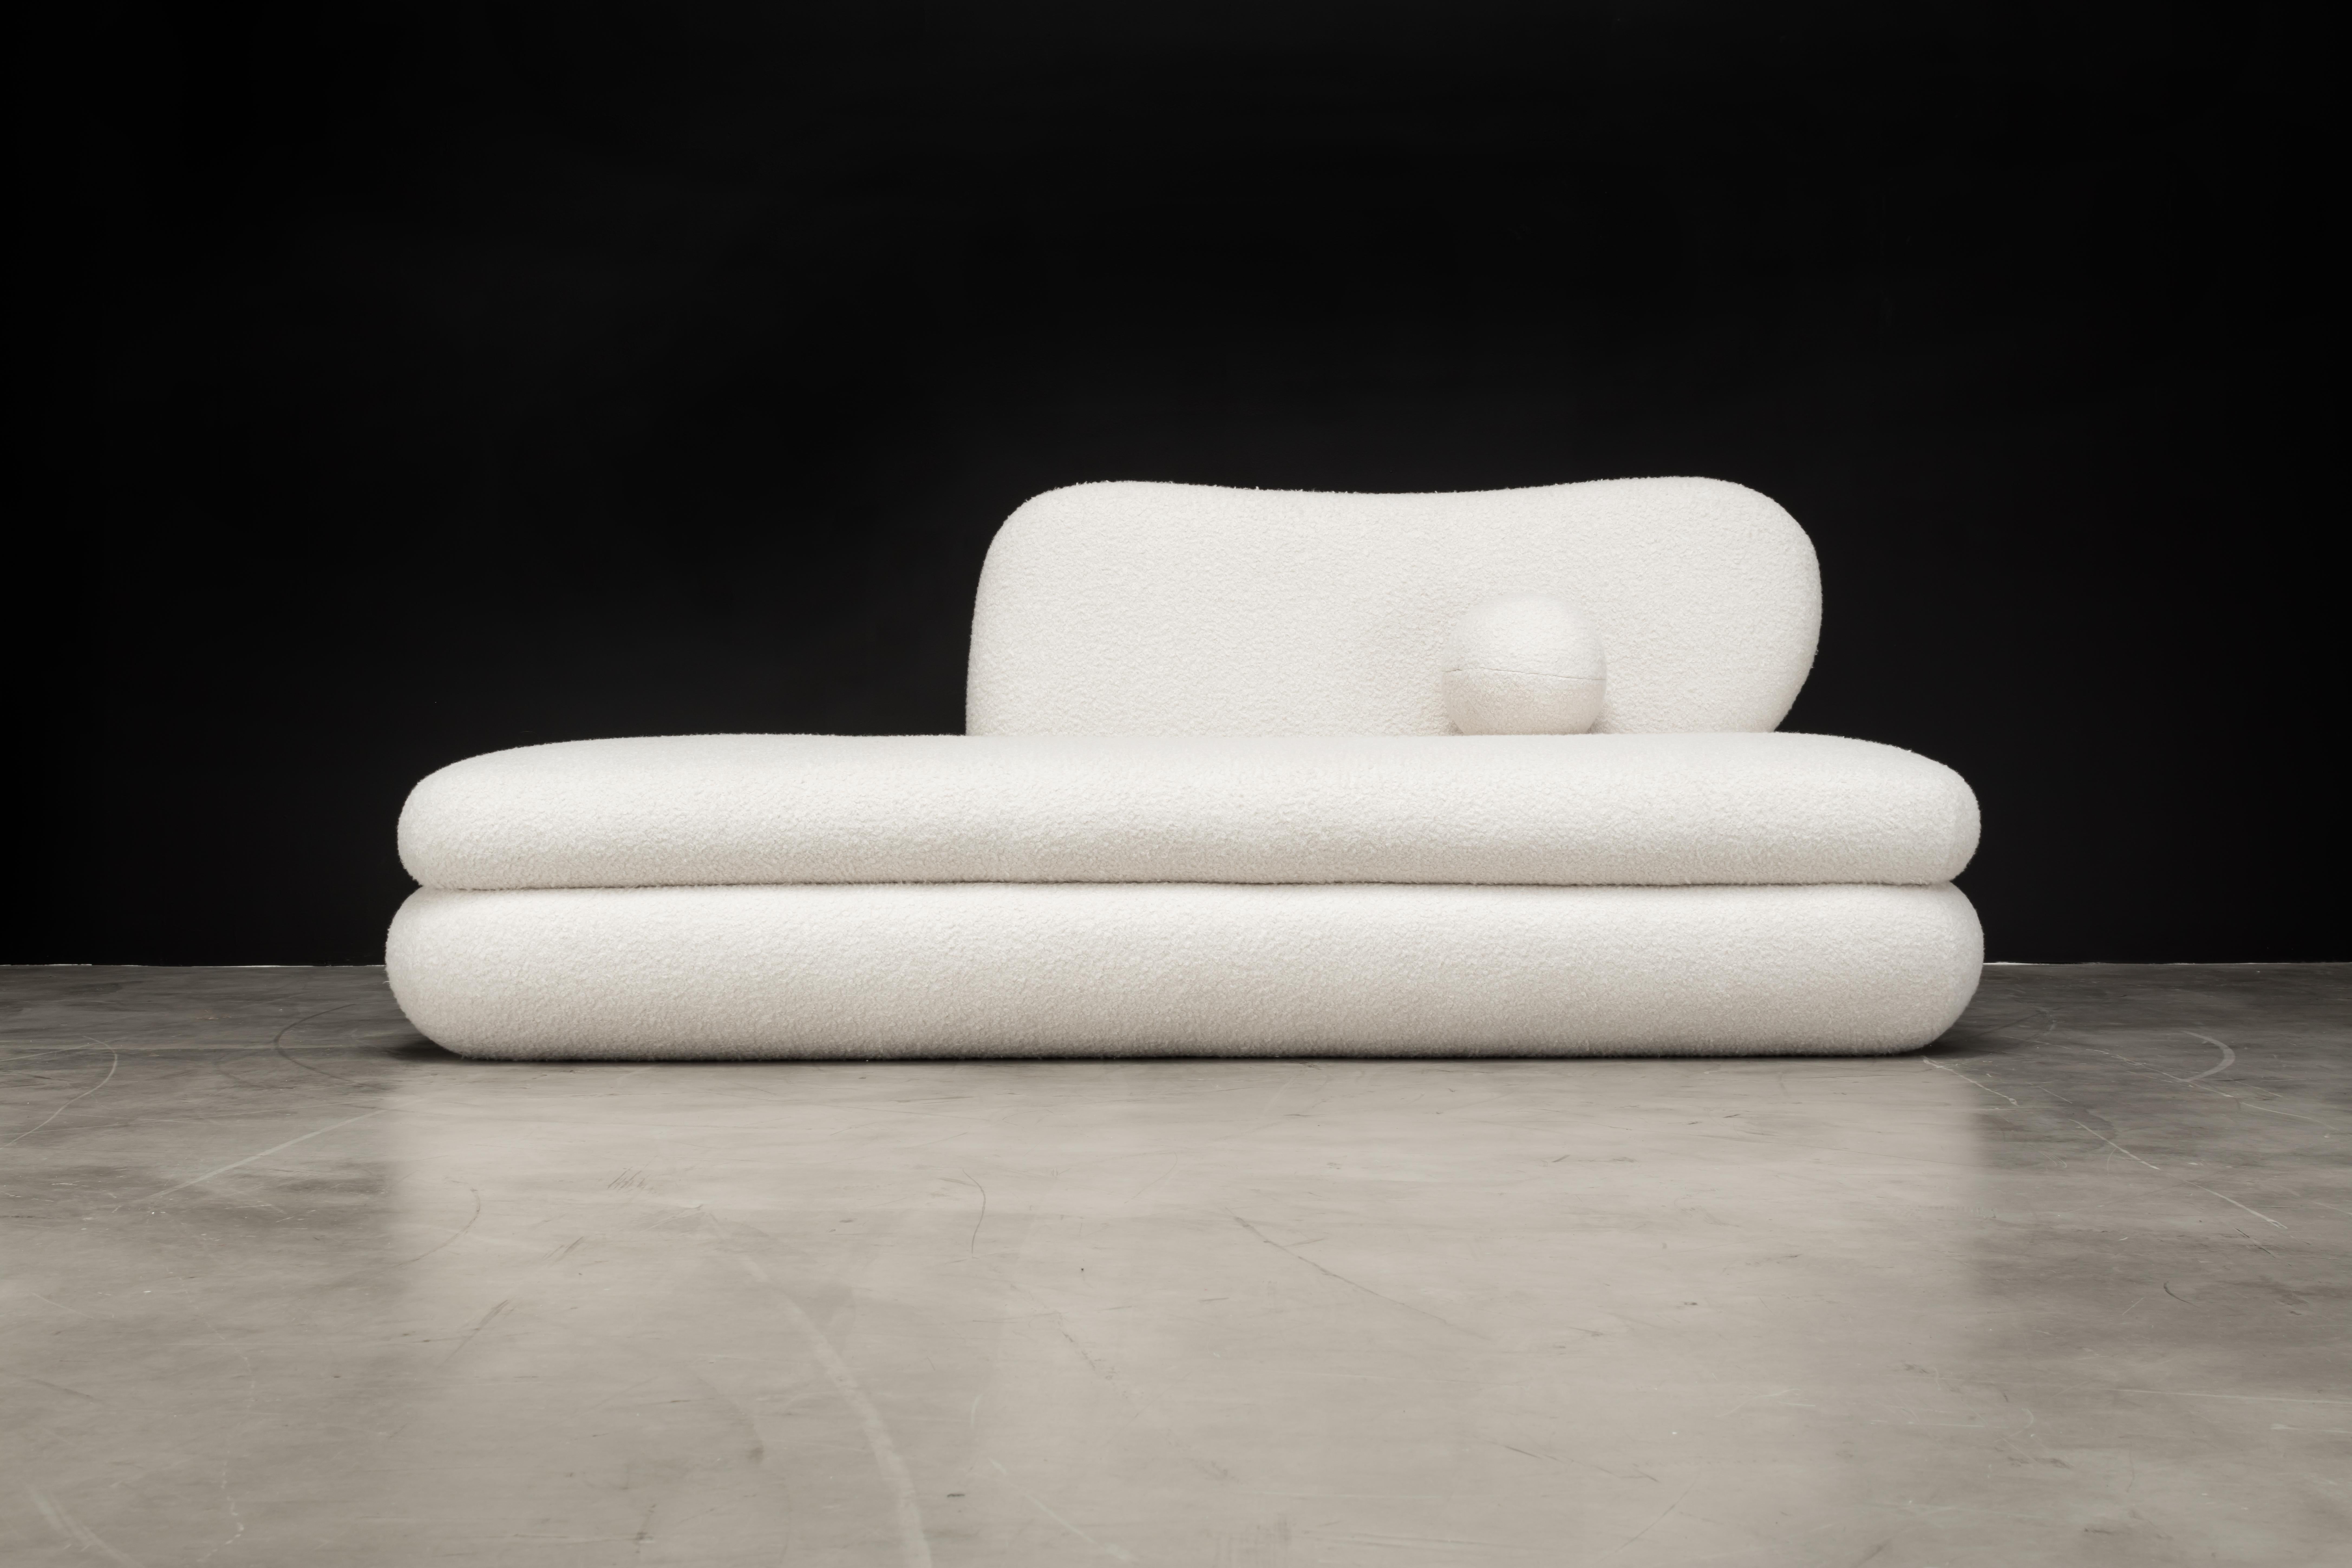 CURVE CHAISE - Modern Layered Asymmetrical Chaise in Cream Boucle

The Curve Chaise features layered asymmetrical design elements that are both sophisticated and simple. The unbalanced tension works beautifully together to make a minimal and elegant